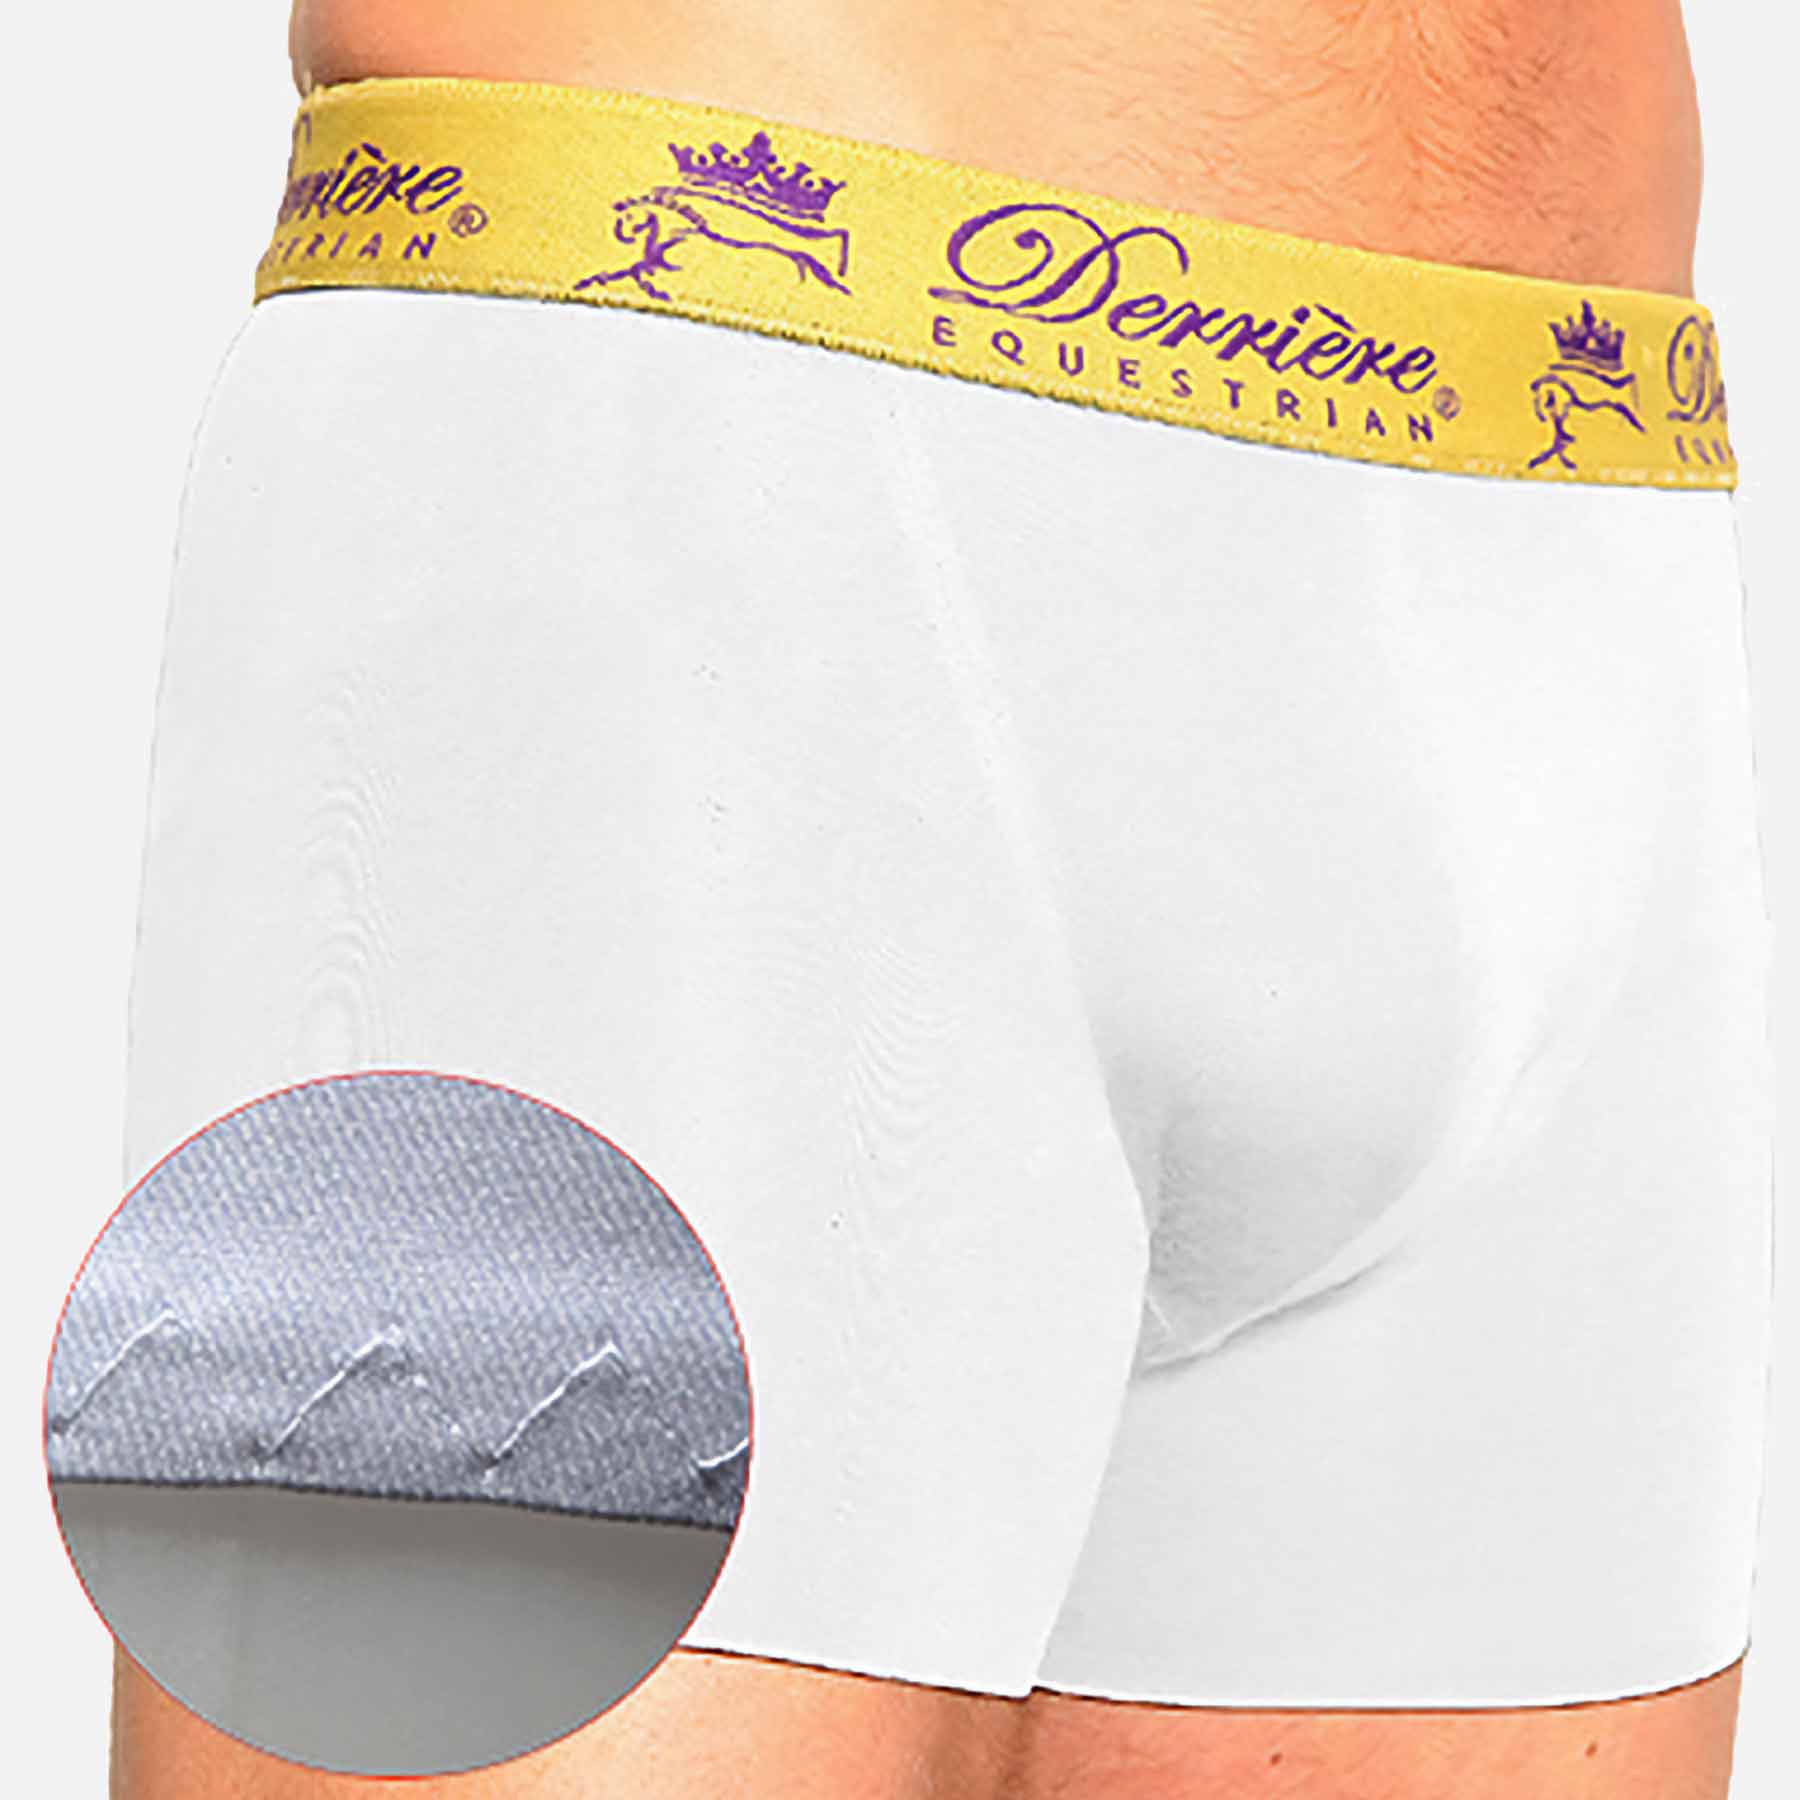 Derriere Bonded Padded Shorty Male